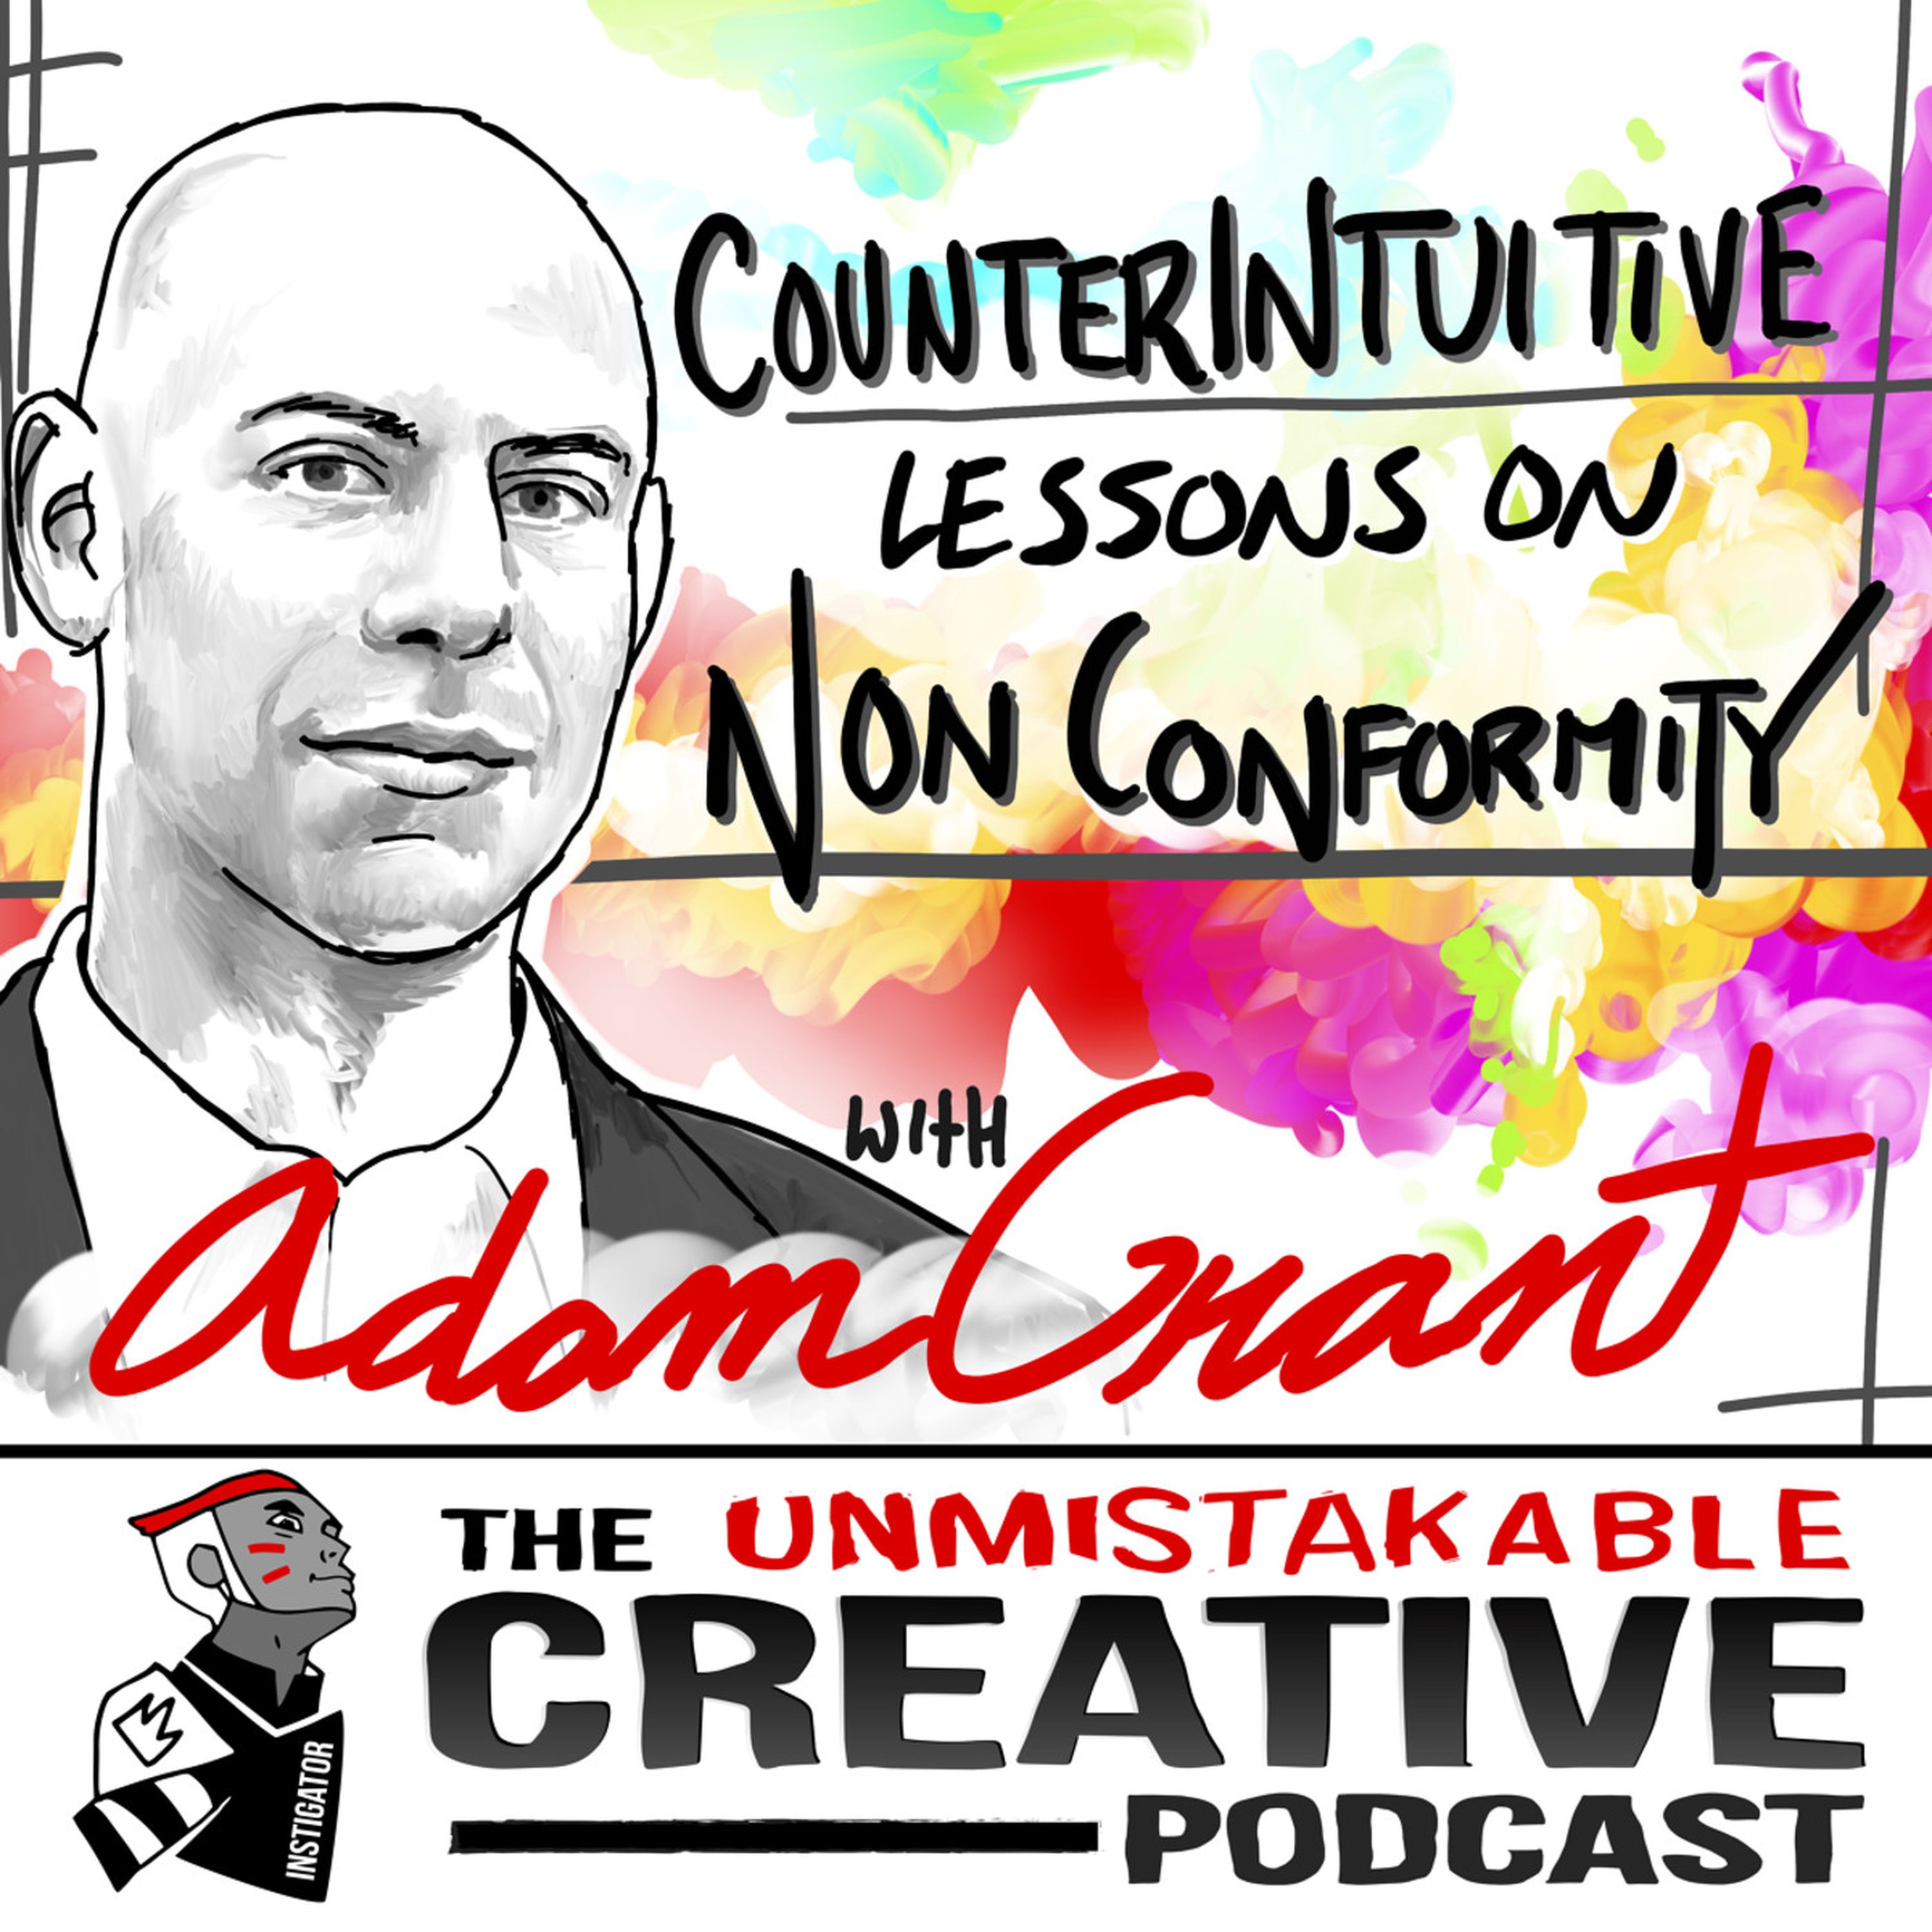 Counterintuitive Lessons on Non-Conformity with Adam Grant Image